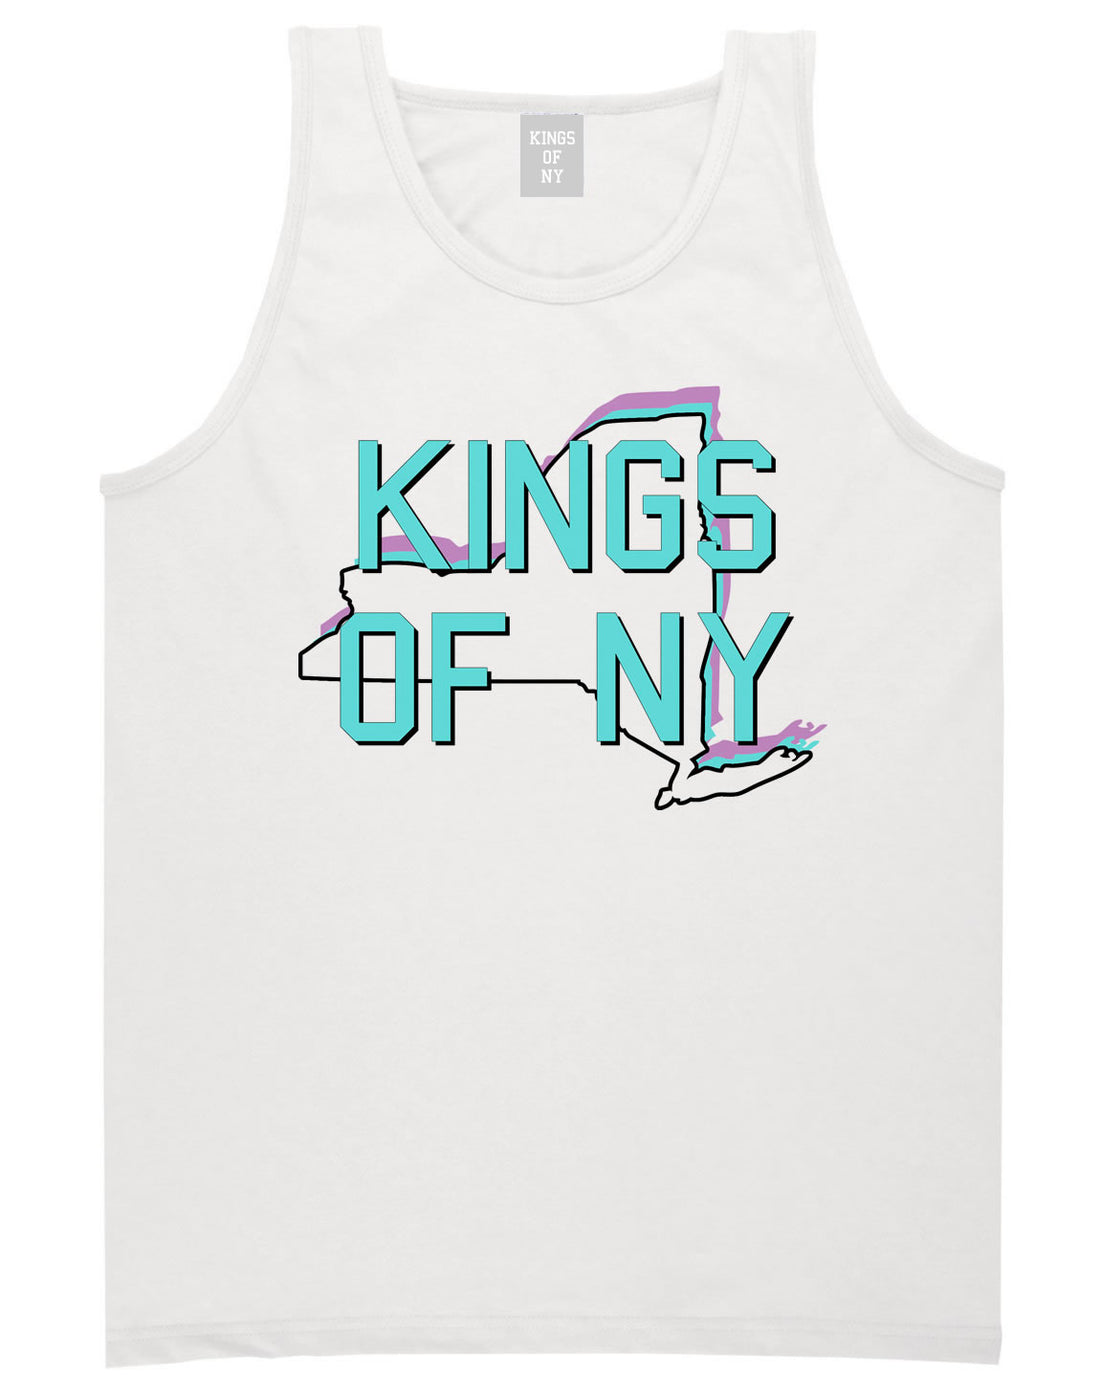 New York State Outline Tank Top in White by Kings Of NY